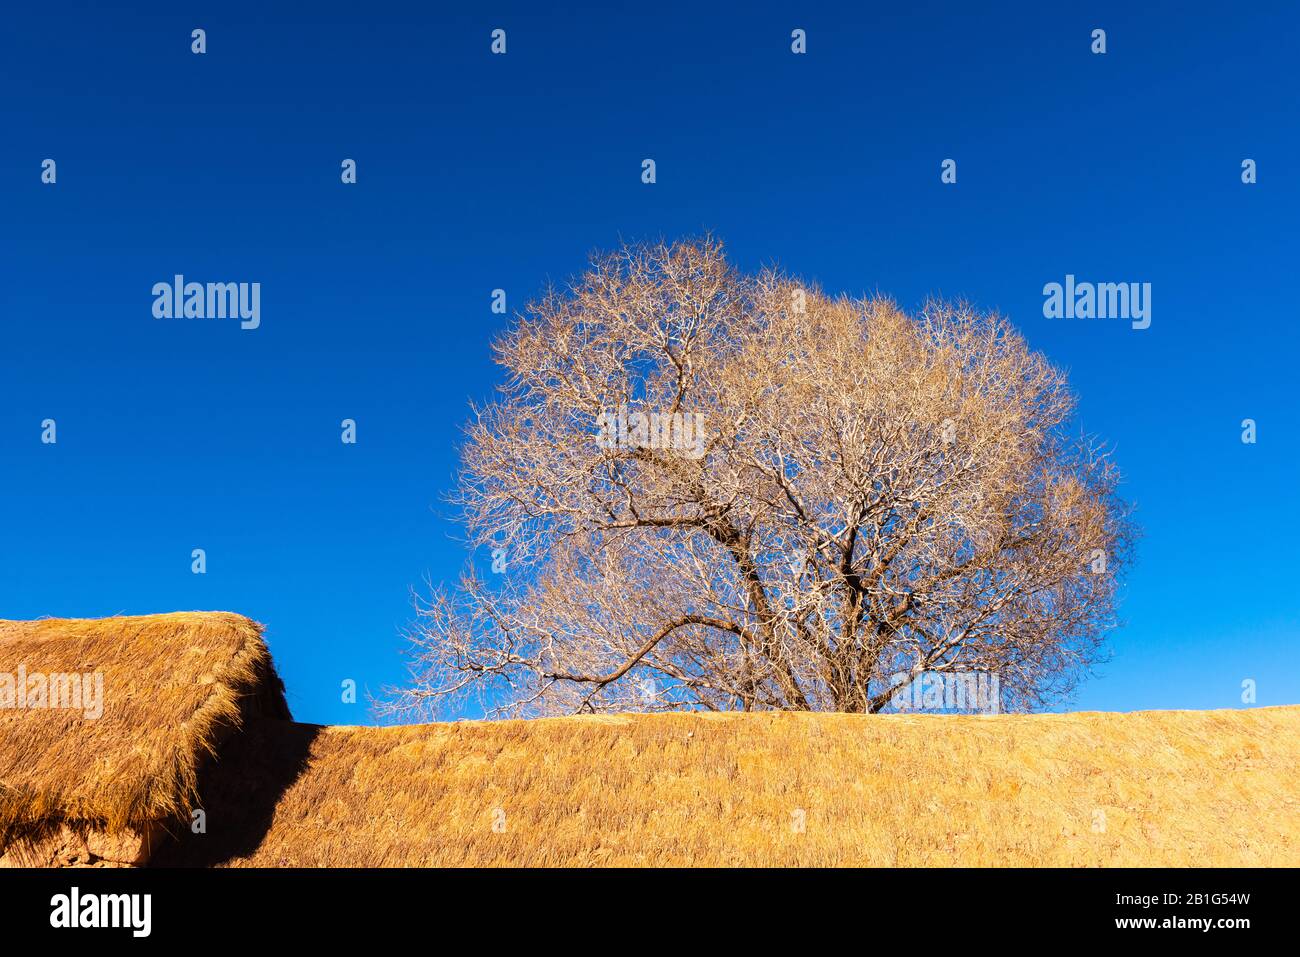 Bald tree in  the small town of Susques in National Route 52, high-altitude Andes, Puna desert, Province of Jujuy, NW Argentina, Latin America Stock Photo